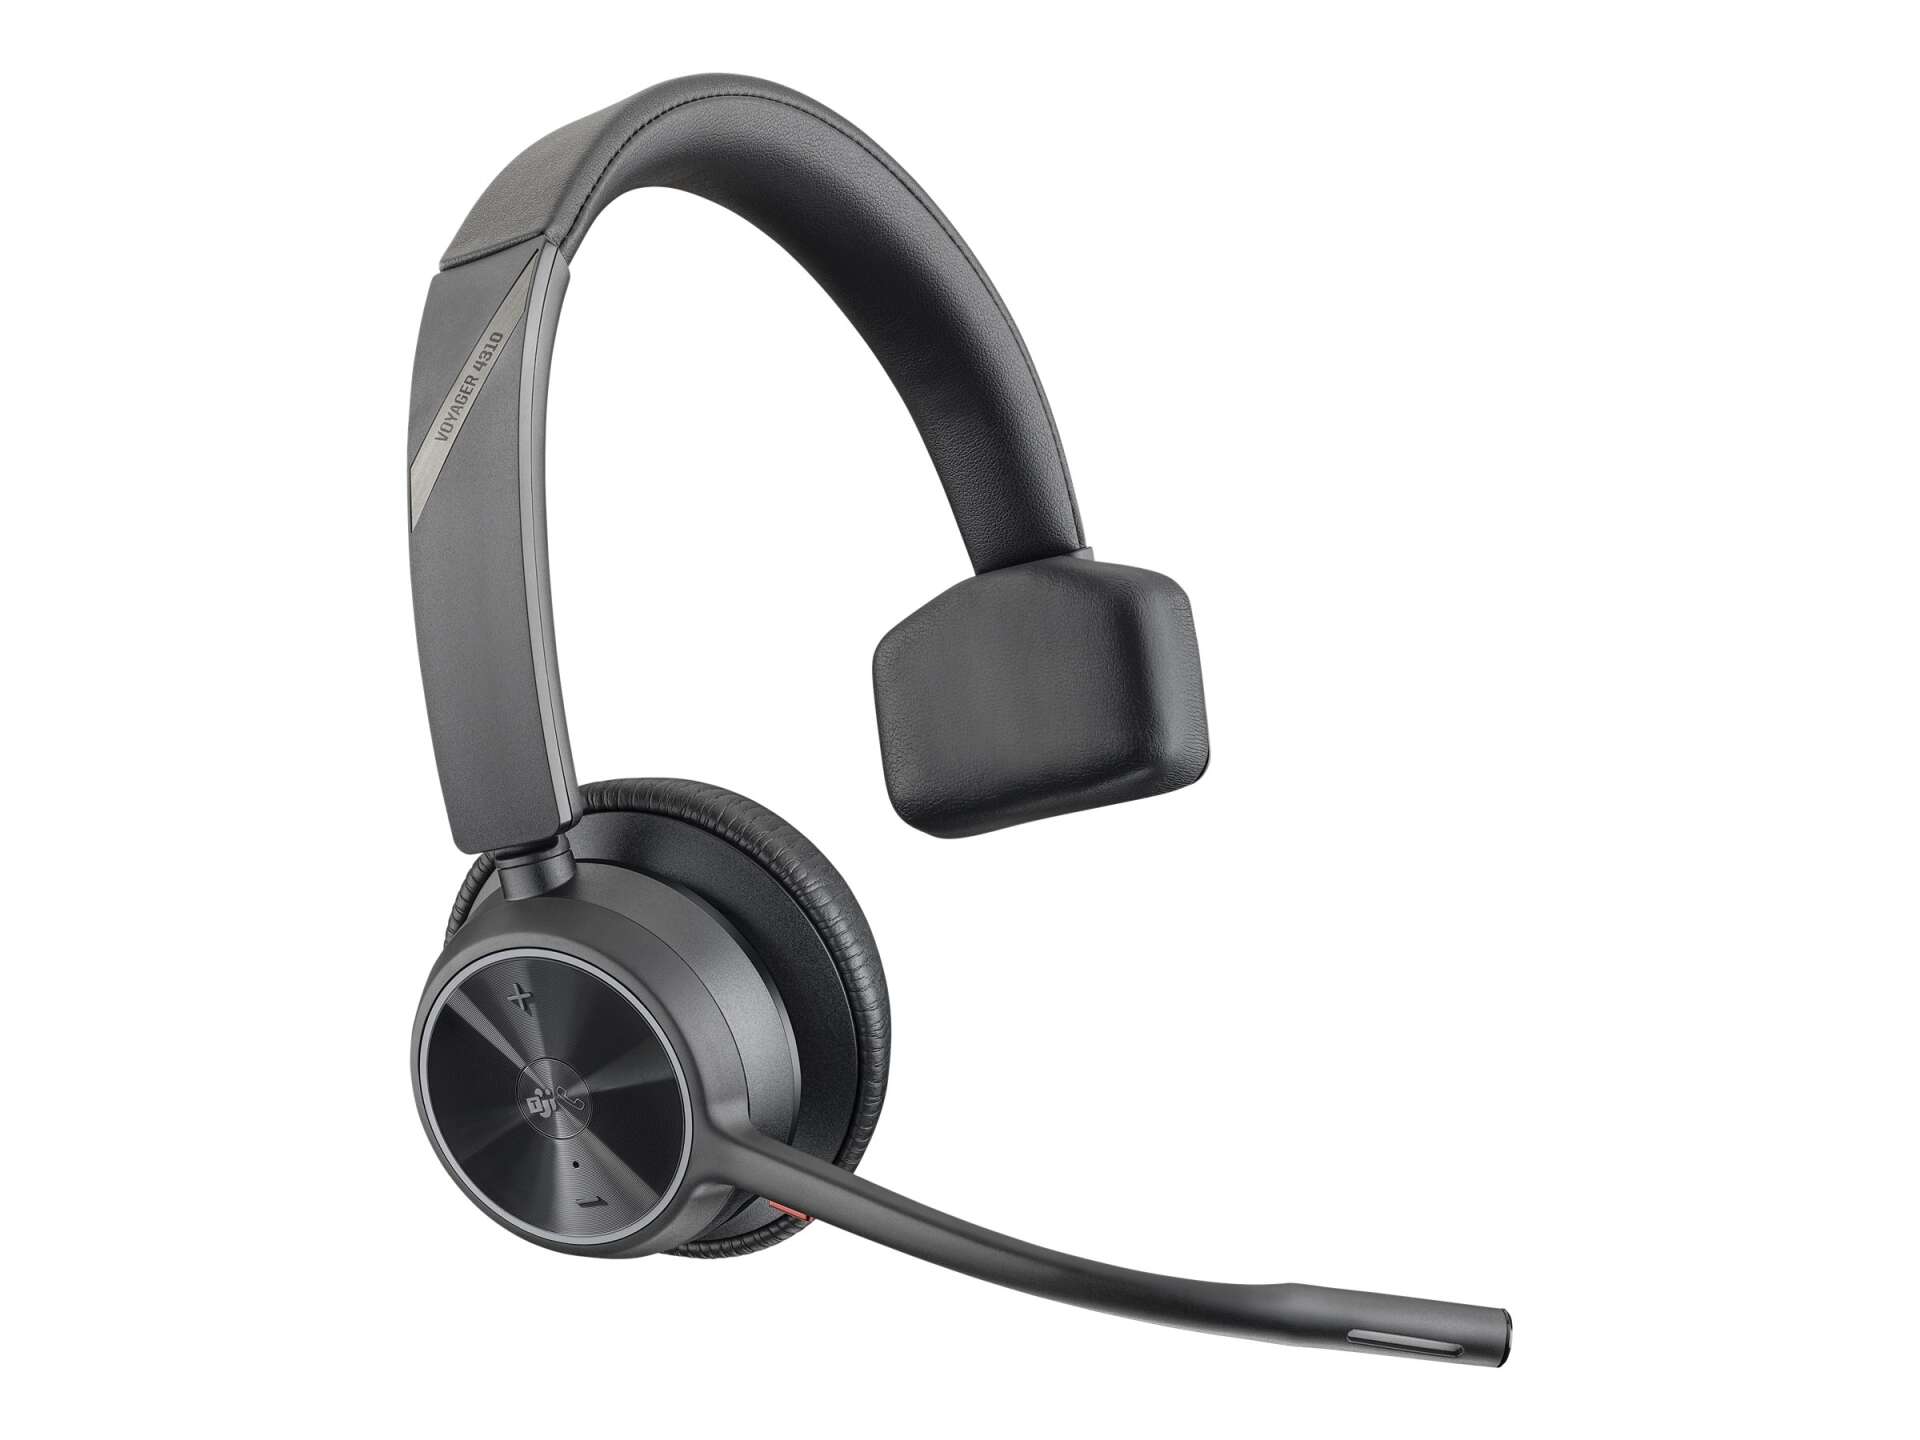 Poly voyager 4310 uc v4310-m headset